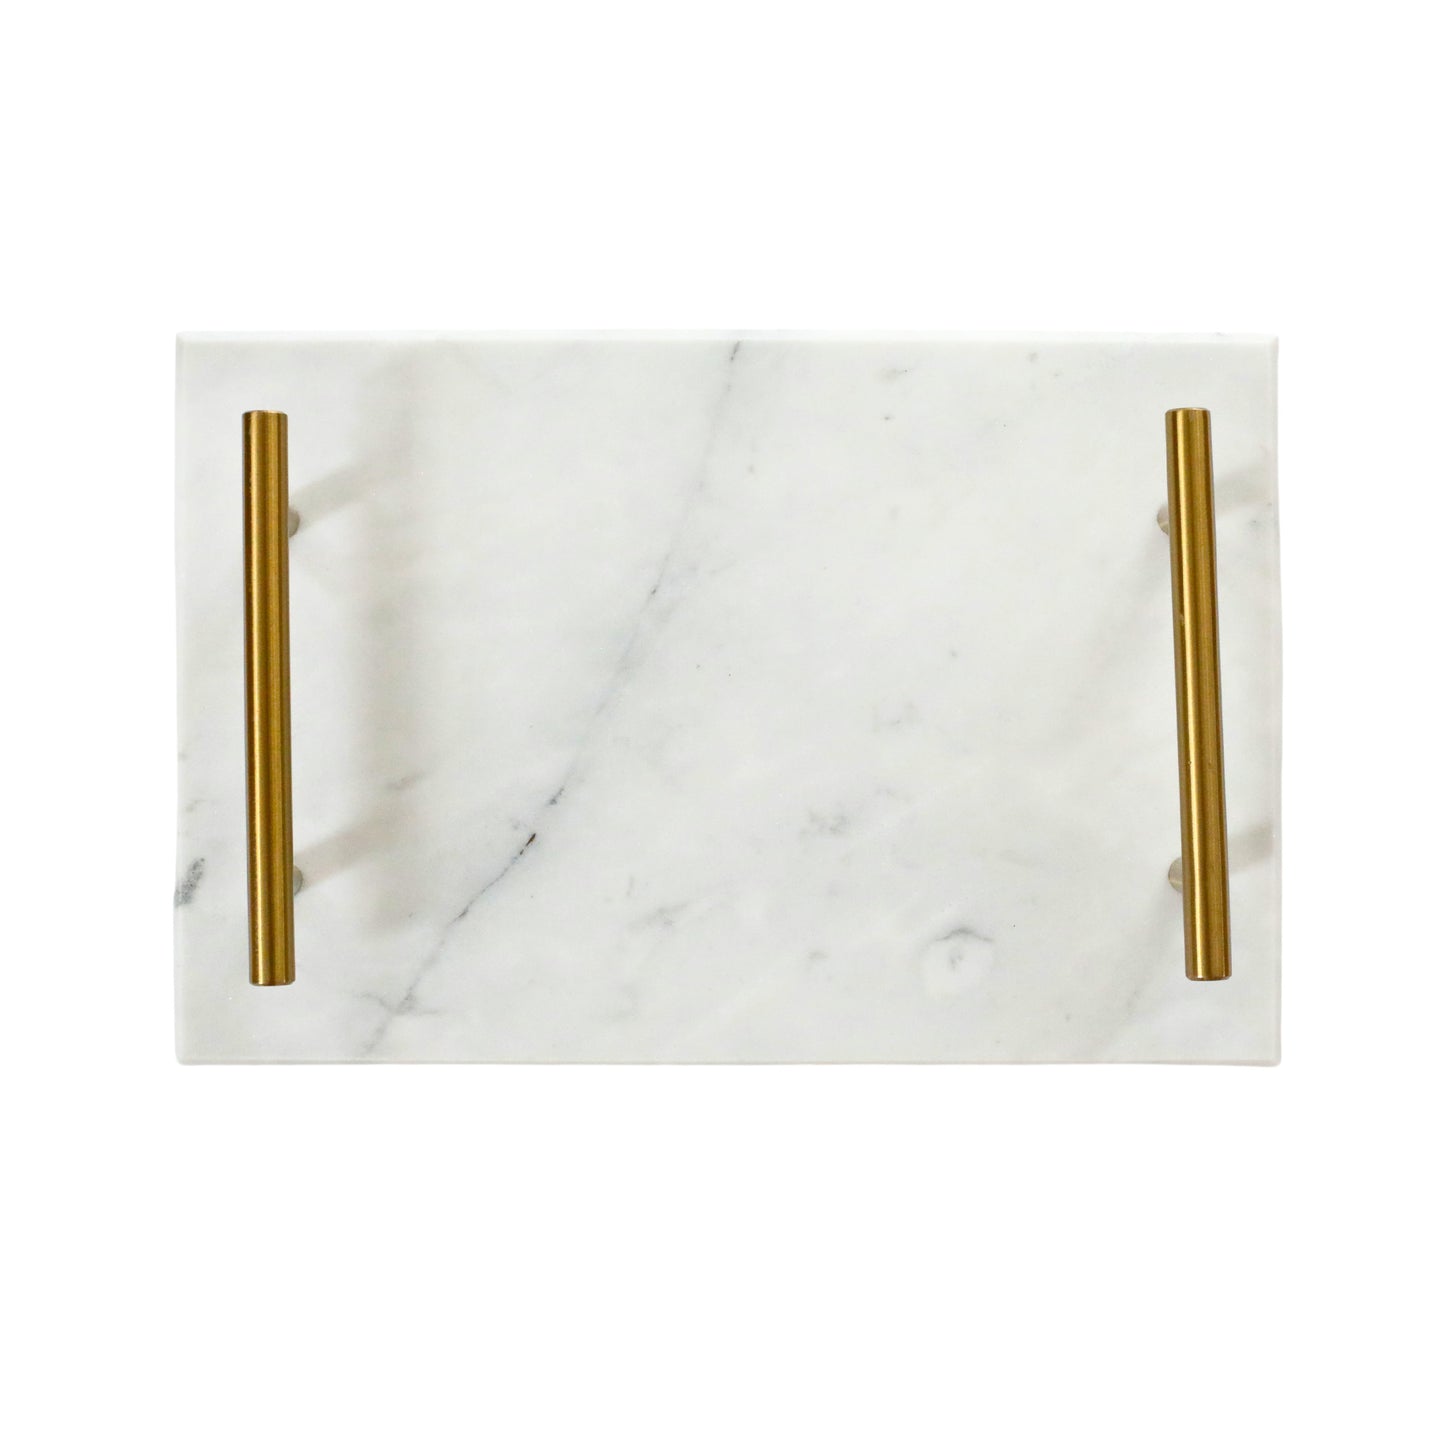 White Marble Board with Gold Handles